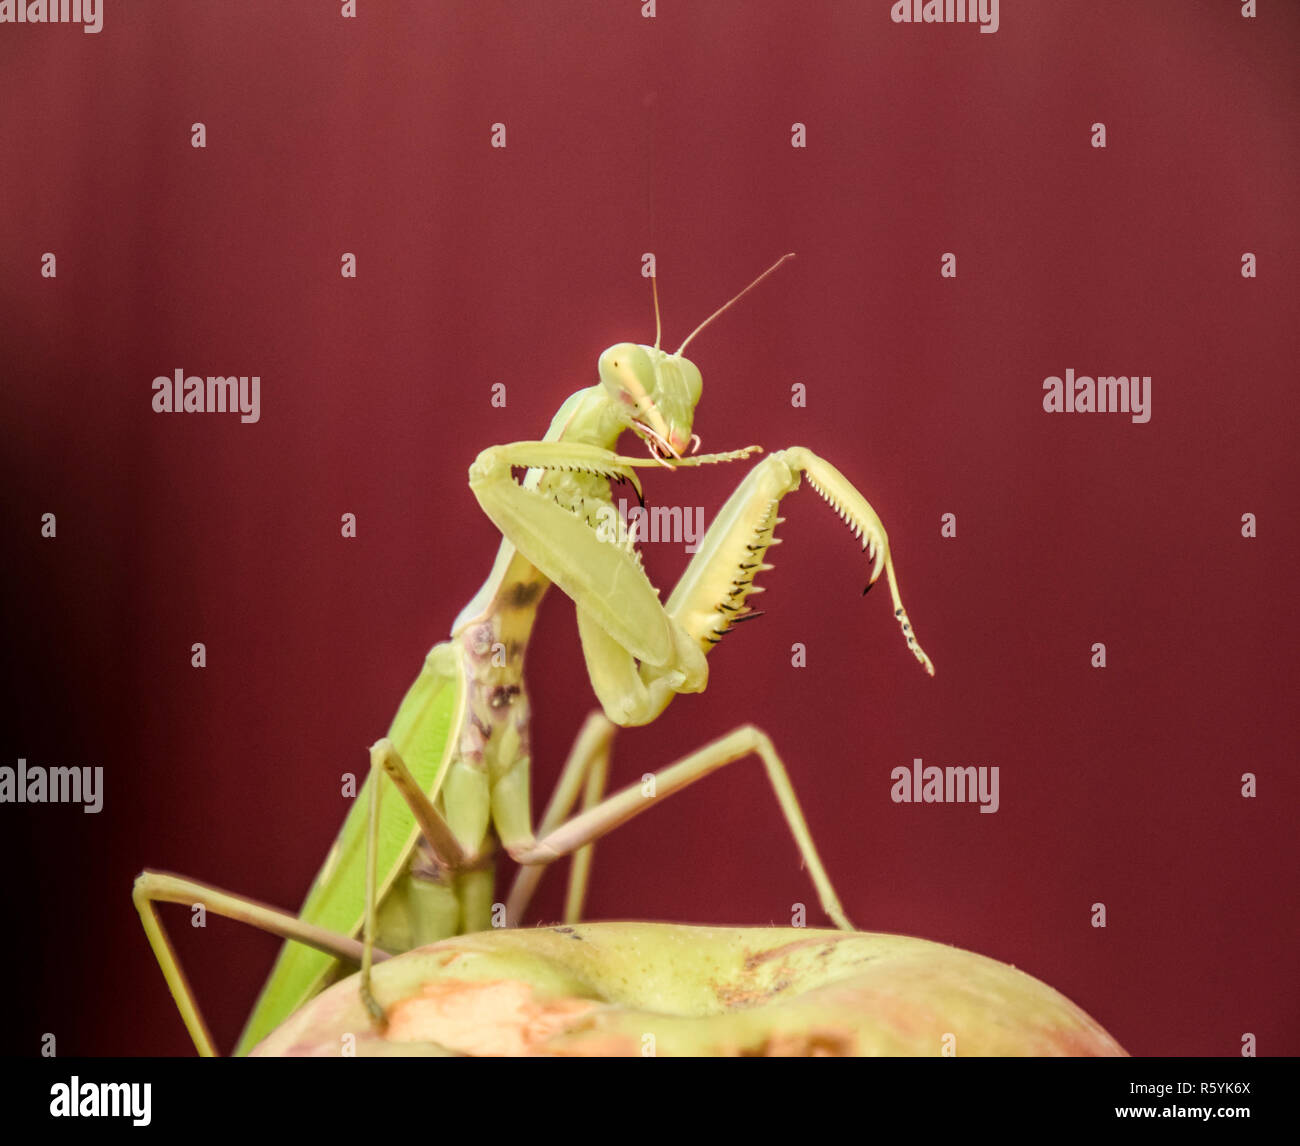 Mantis on a red background. Mating mantises. Mantis insect preda Stock Photo